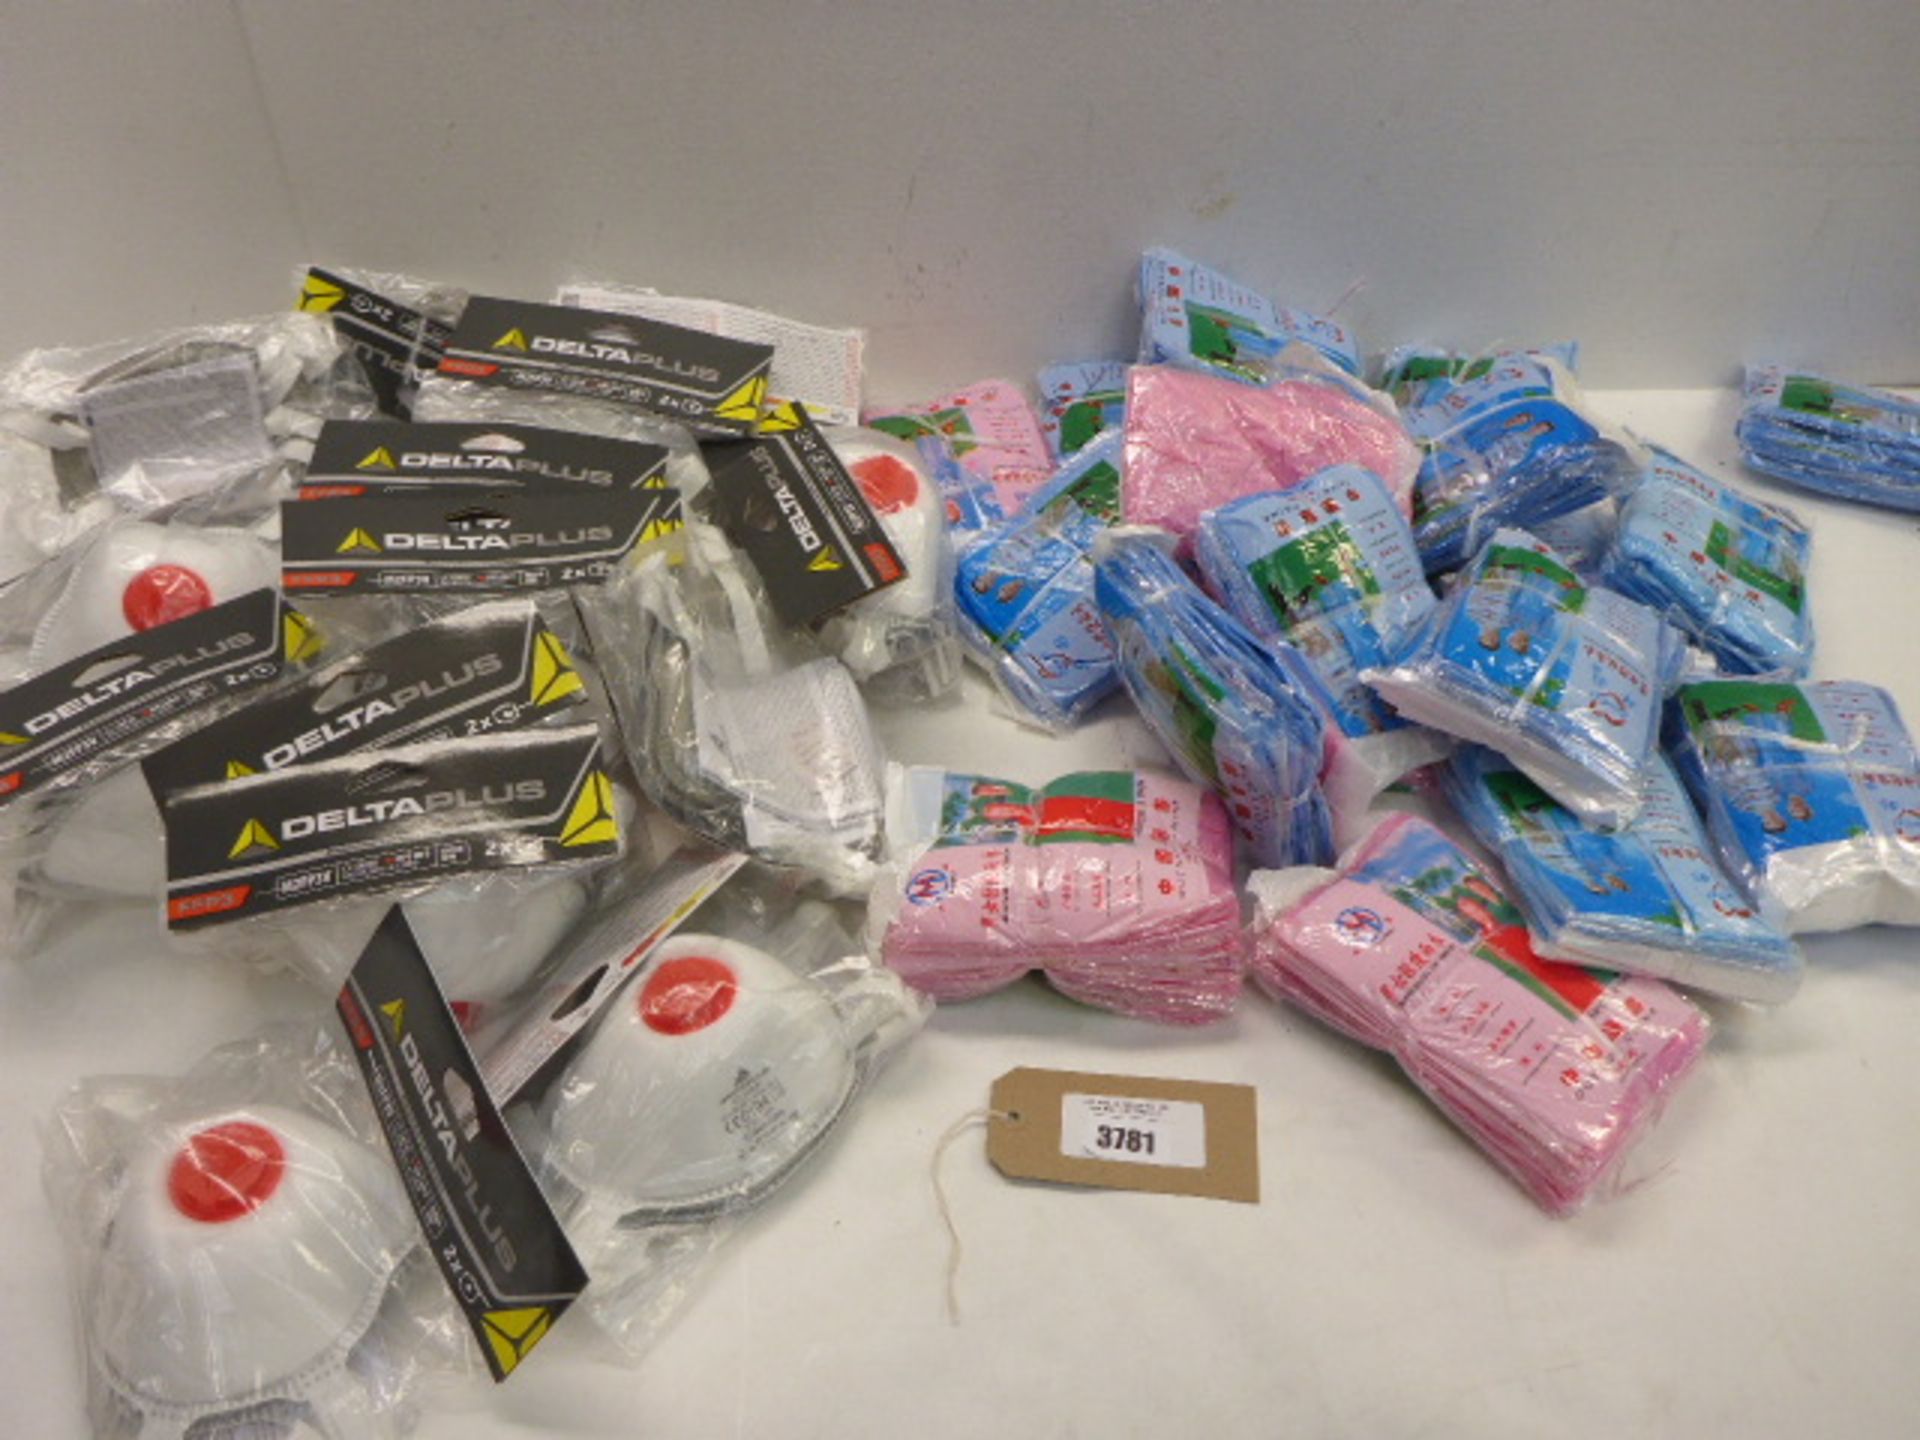 Quantity of personal protection face masks and plastic rain coats